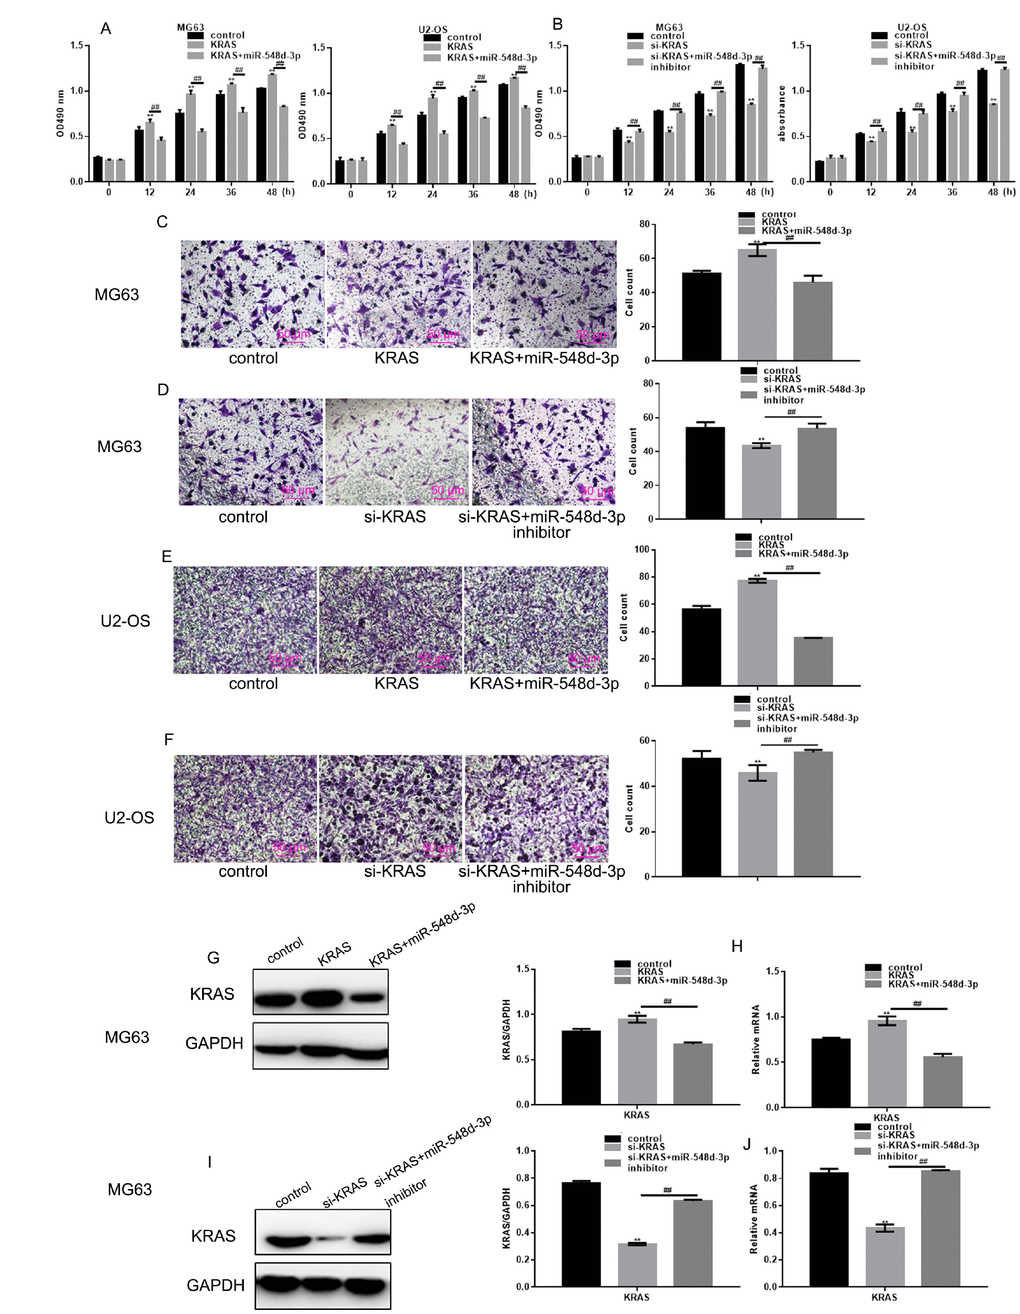 MiR-548d-3p inhibits the growth and migration of osteosarcoma cells by downregulating KRAS. (A) After transfection with KRAS overexpression vectors, cells were transfected with miR-548d-3p mimics or control miRNA. Cell growth was measured with an MTT assay after 24 h of transfection. The results represent the mean±SD of three independent experiments. **P P KRAS overexpression group. (B) After transfection with si-KRAS, cells were transfected with miR-548d-3p inhibitors or control miRNA. Cell growth was measured by an MTT assay after 24 h of transfection. The results represent the mean±SD of three independent experiments. **P P KRAS group or si-KRAS group. (C–F) Cell migration was measured with a Transwell assay after 24 h of transfection. The results represent the mean±SD of three independent experiments. **P P KRAS group or si-KRAS group. (G–N) The protein and mRNA levels of KRAS were measured in cells by Western blotting and real-time PCR, respectively. The results represent the mean±SD of three independent experiments. **P P KRAS group or si-KRAS group.